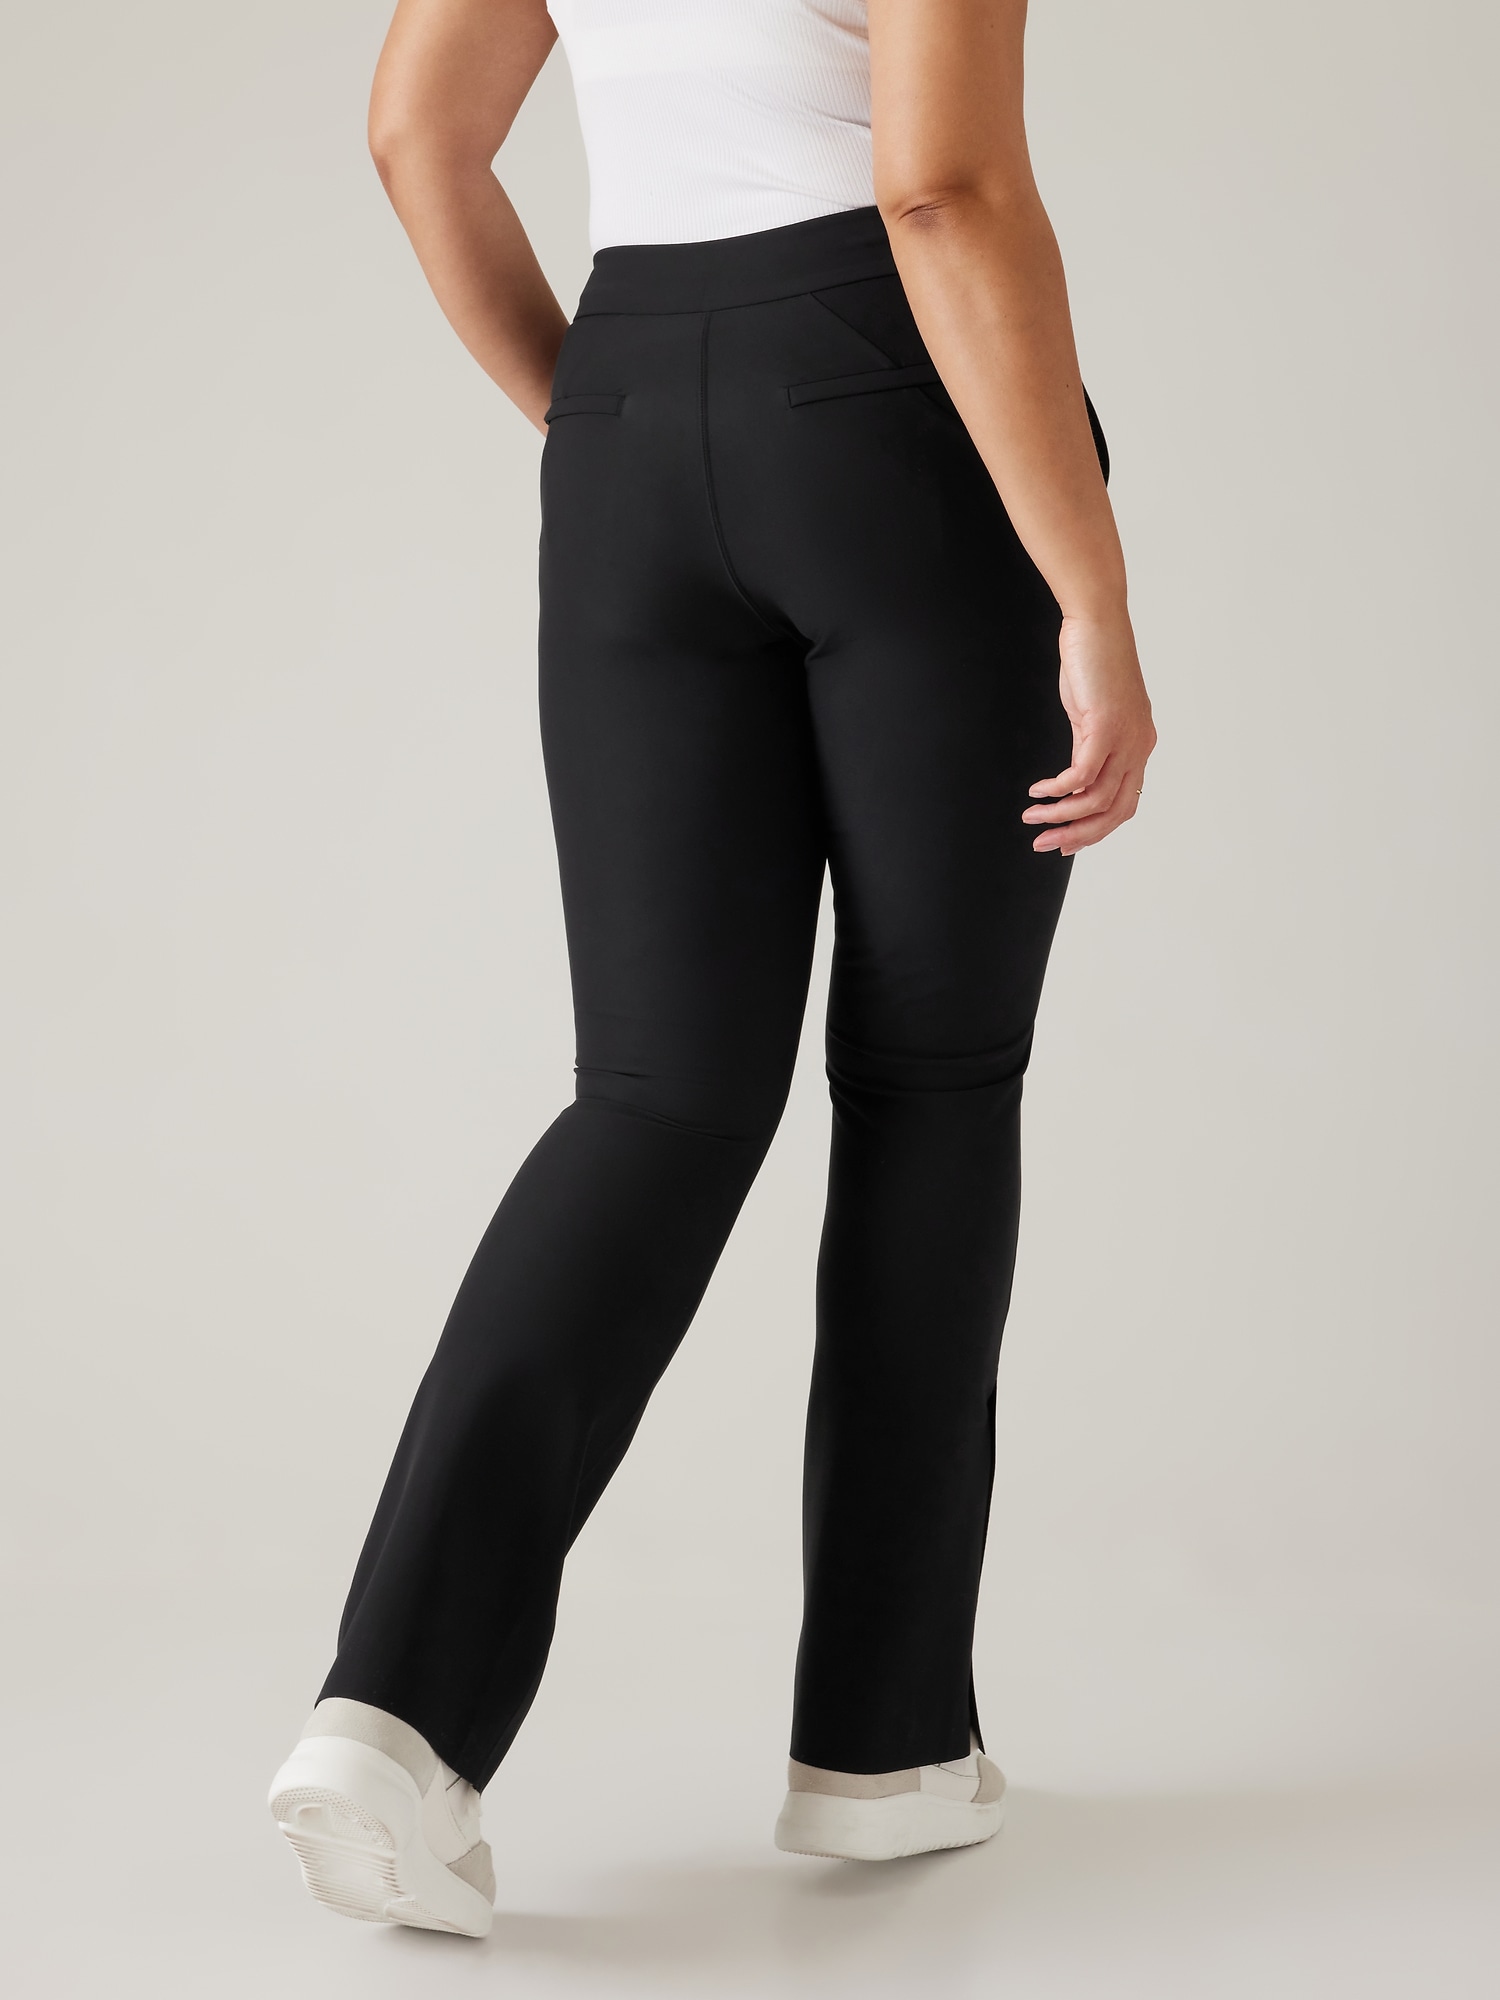 Athleta Brooklyn Ankle Pant Review: They Live up to the Hype